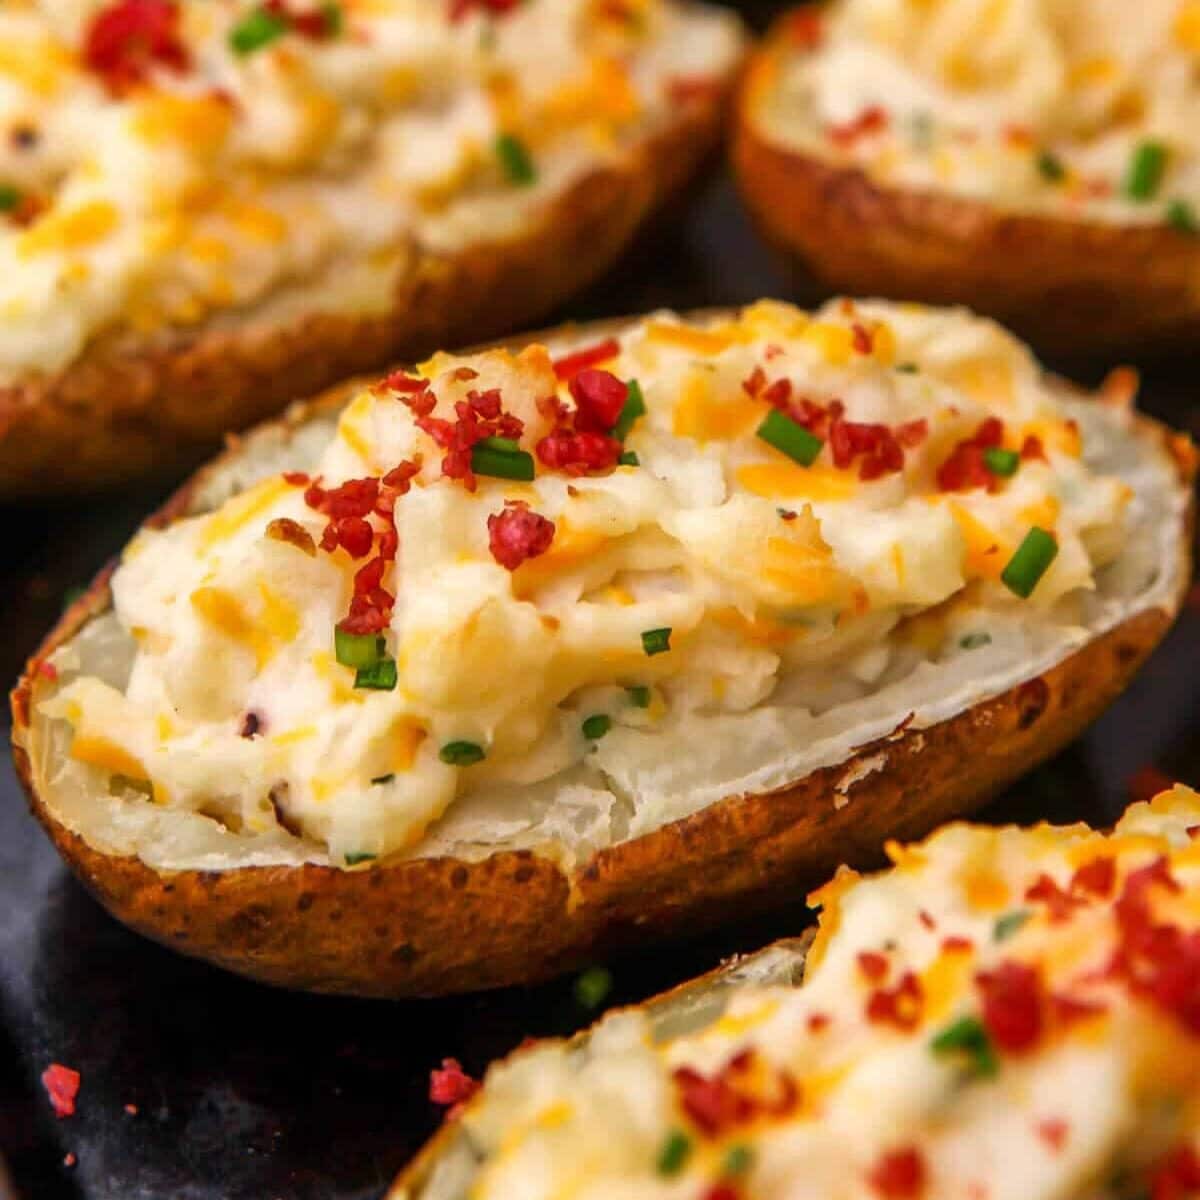 Baked potatoes topped with vegan cheese, sour cream, and bacon bits.